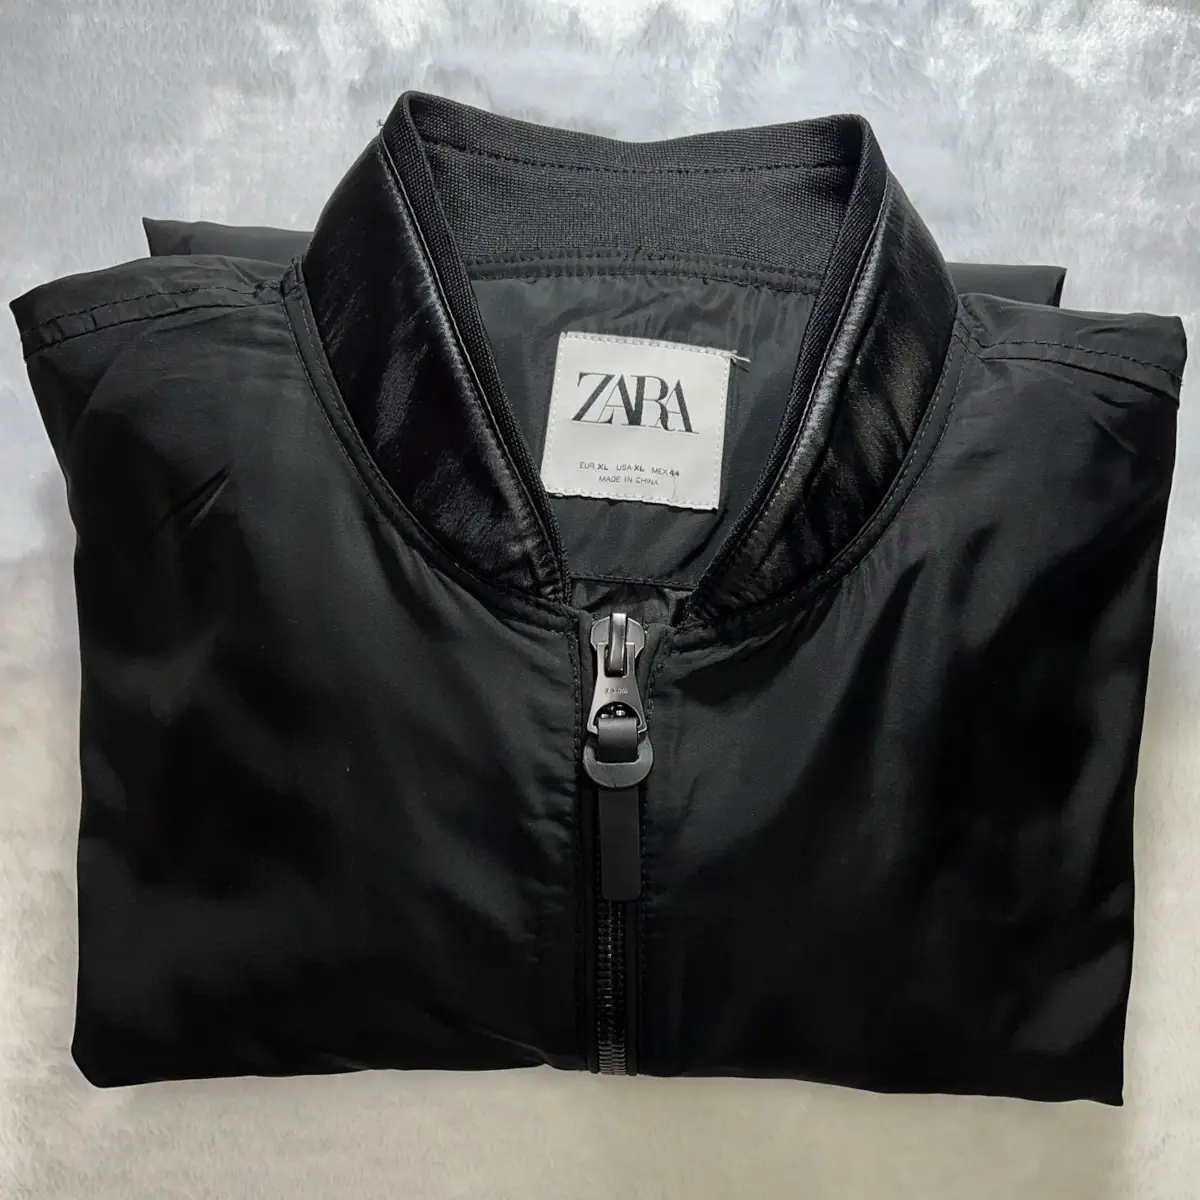 Picture shows a restored black Zara jacket with replacement faux leather material sewn on the the jacket.